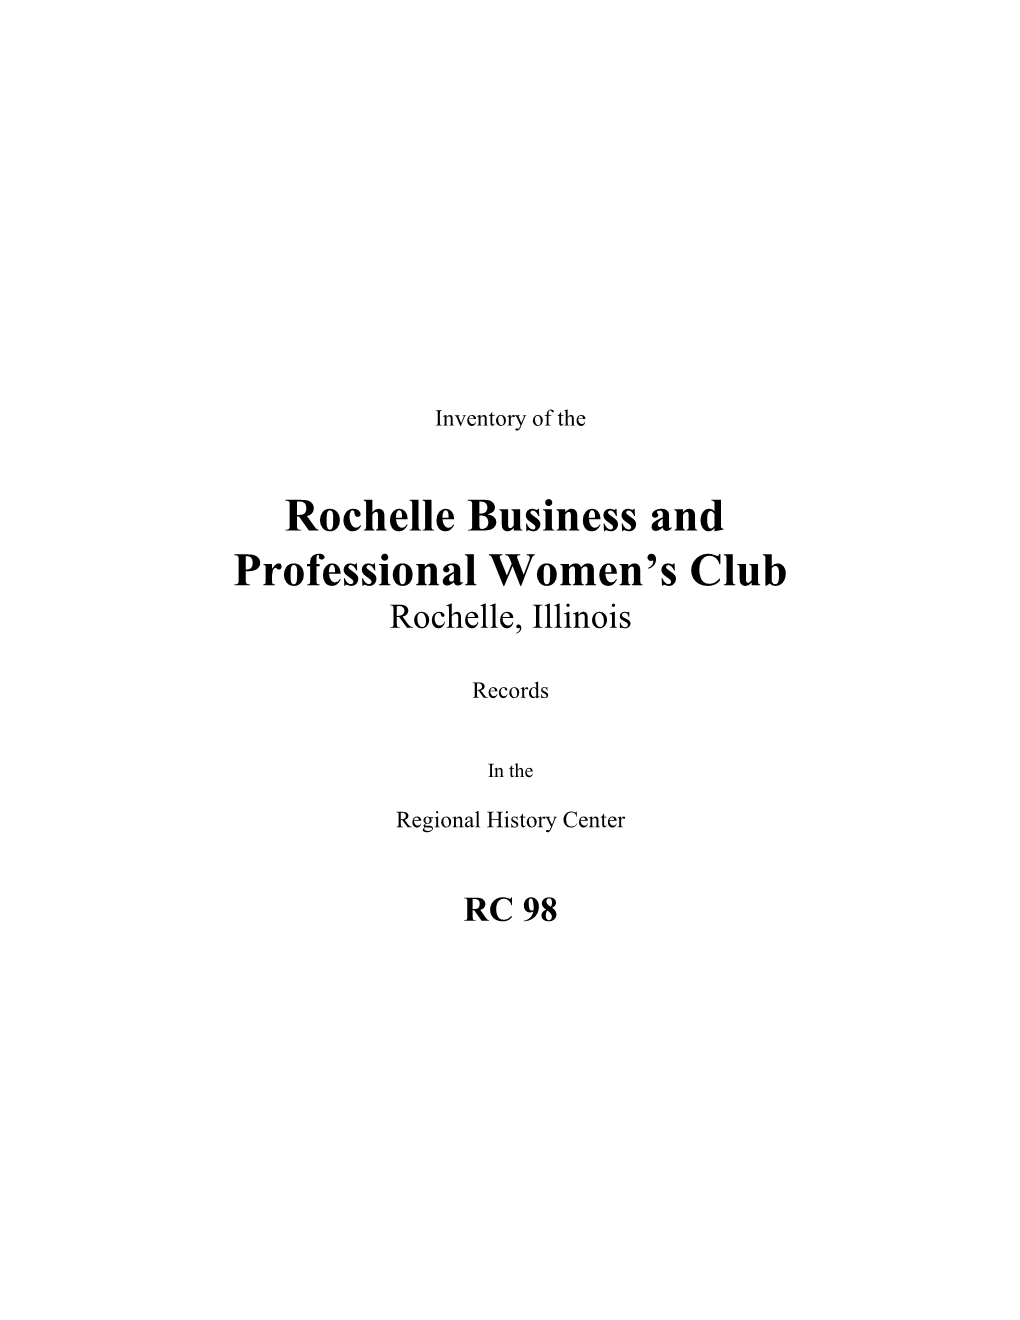 Rochelle Business and Professional Women's Club